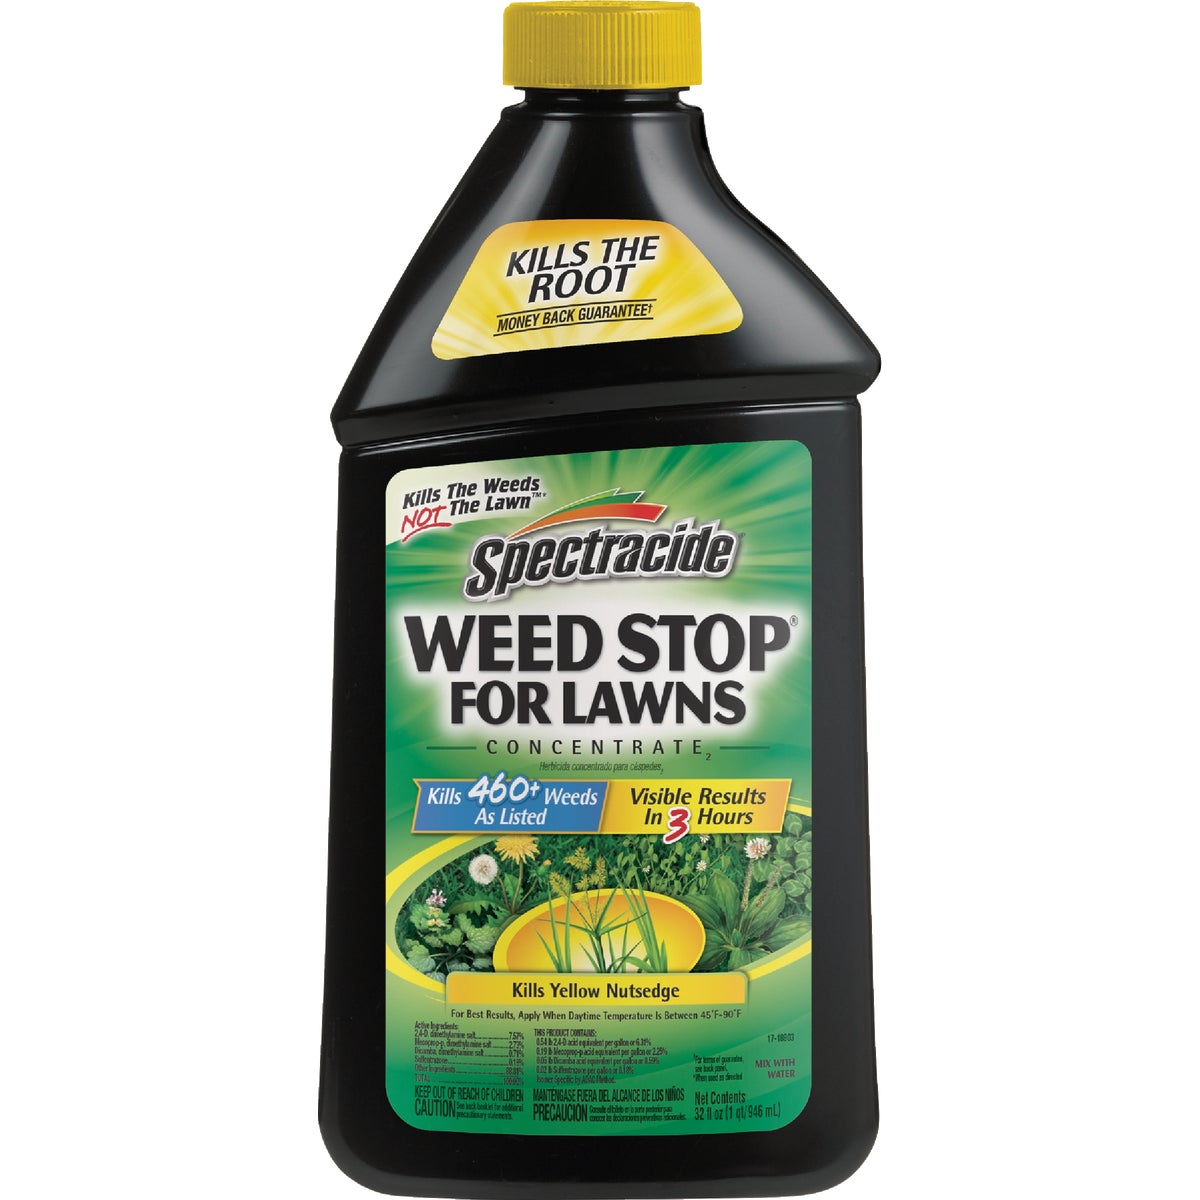 Spectracide Weed Stop For Lawns 32 Oz. Concentrate Weed Killer